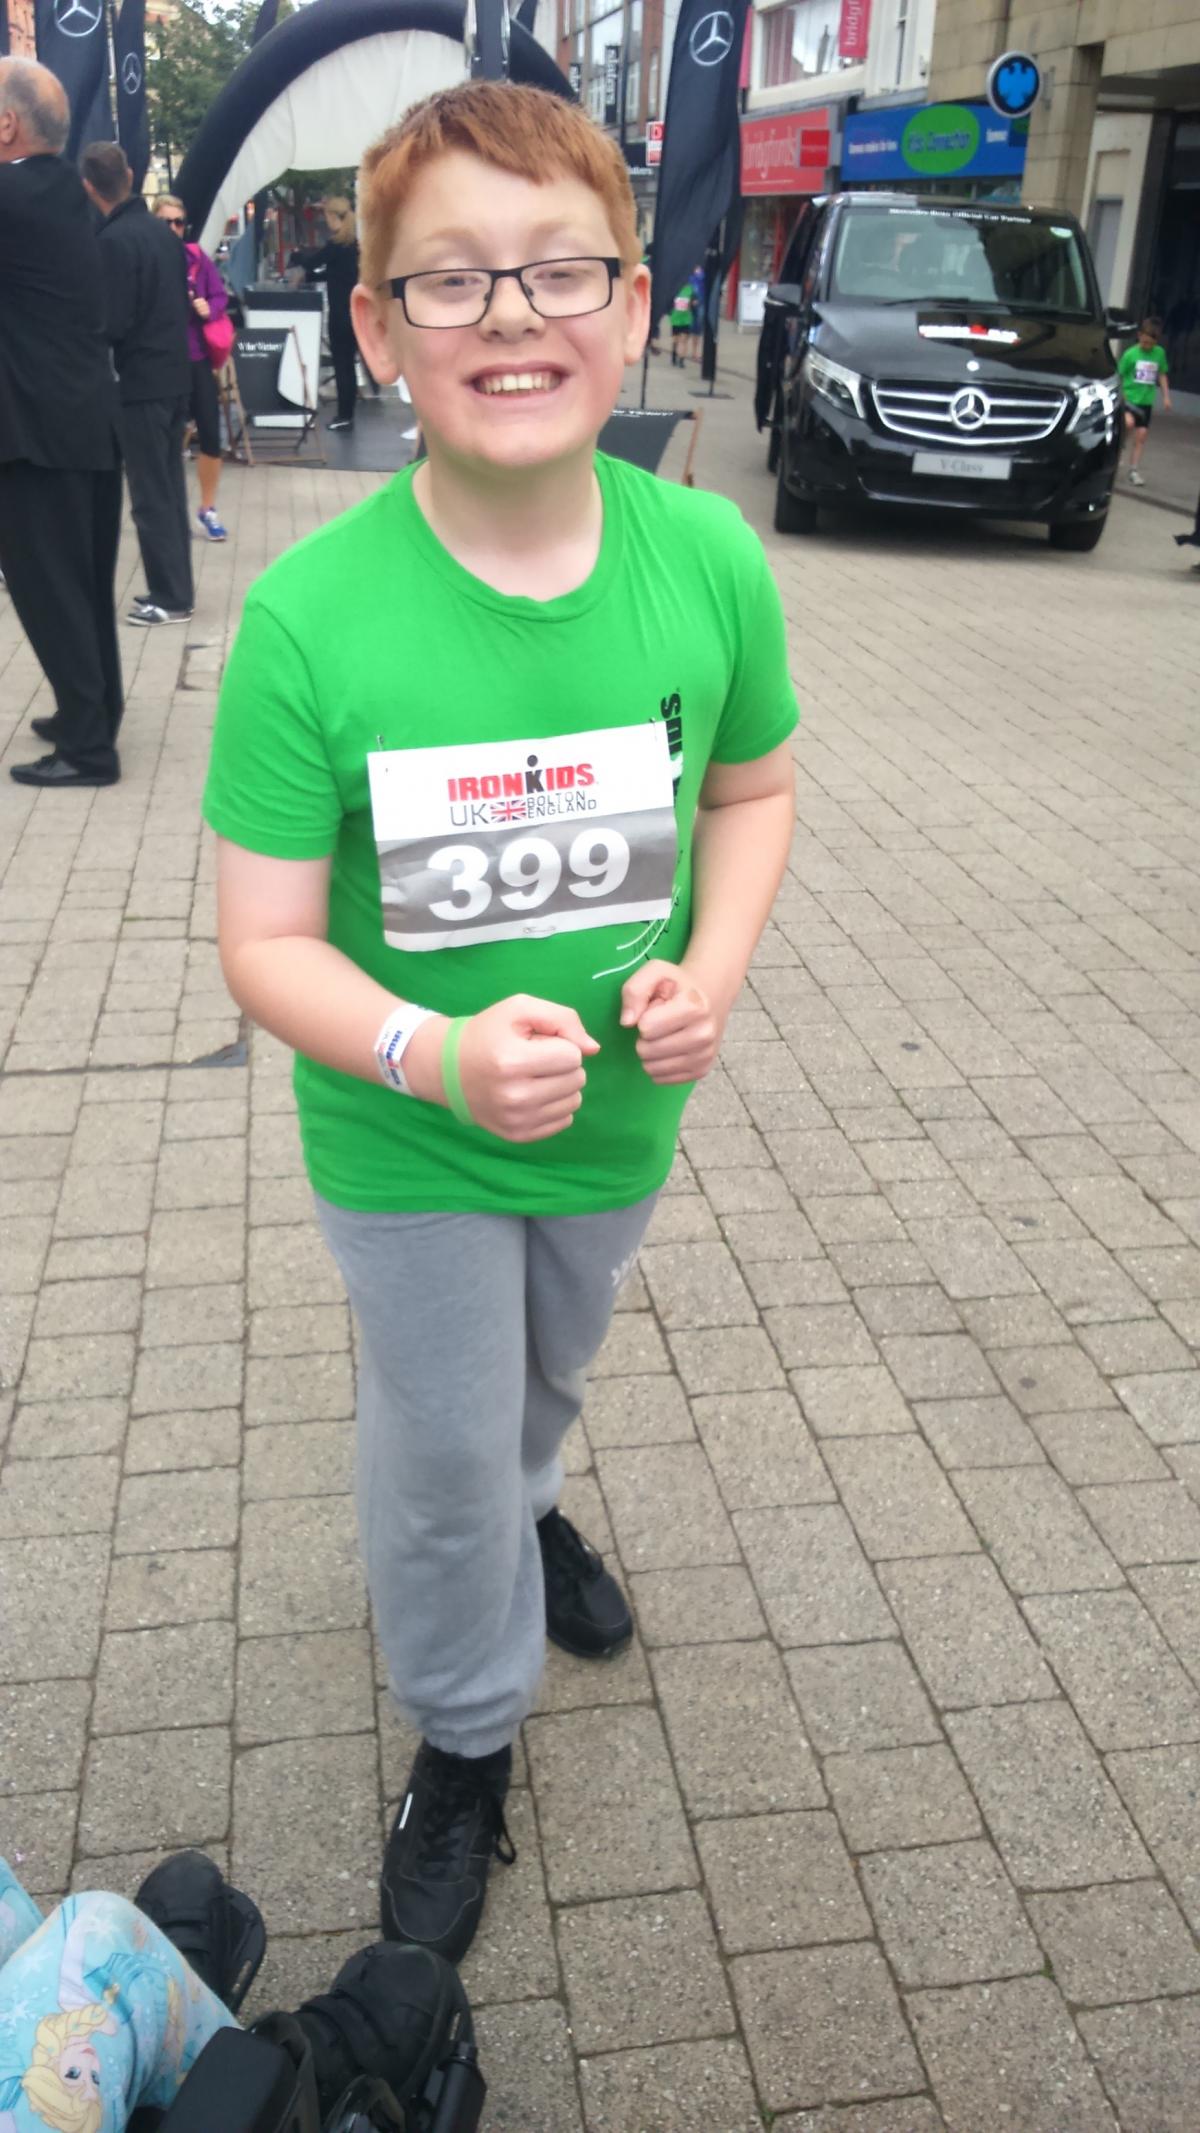 Horwich 11-year-old Jacob Nelson, who raised £190 for the Royal Manchester Children’s Hospital alongside sister Maddie, aged eight.